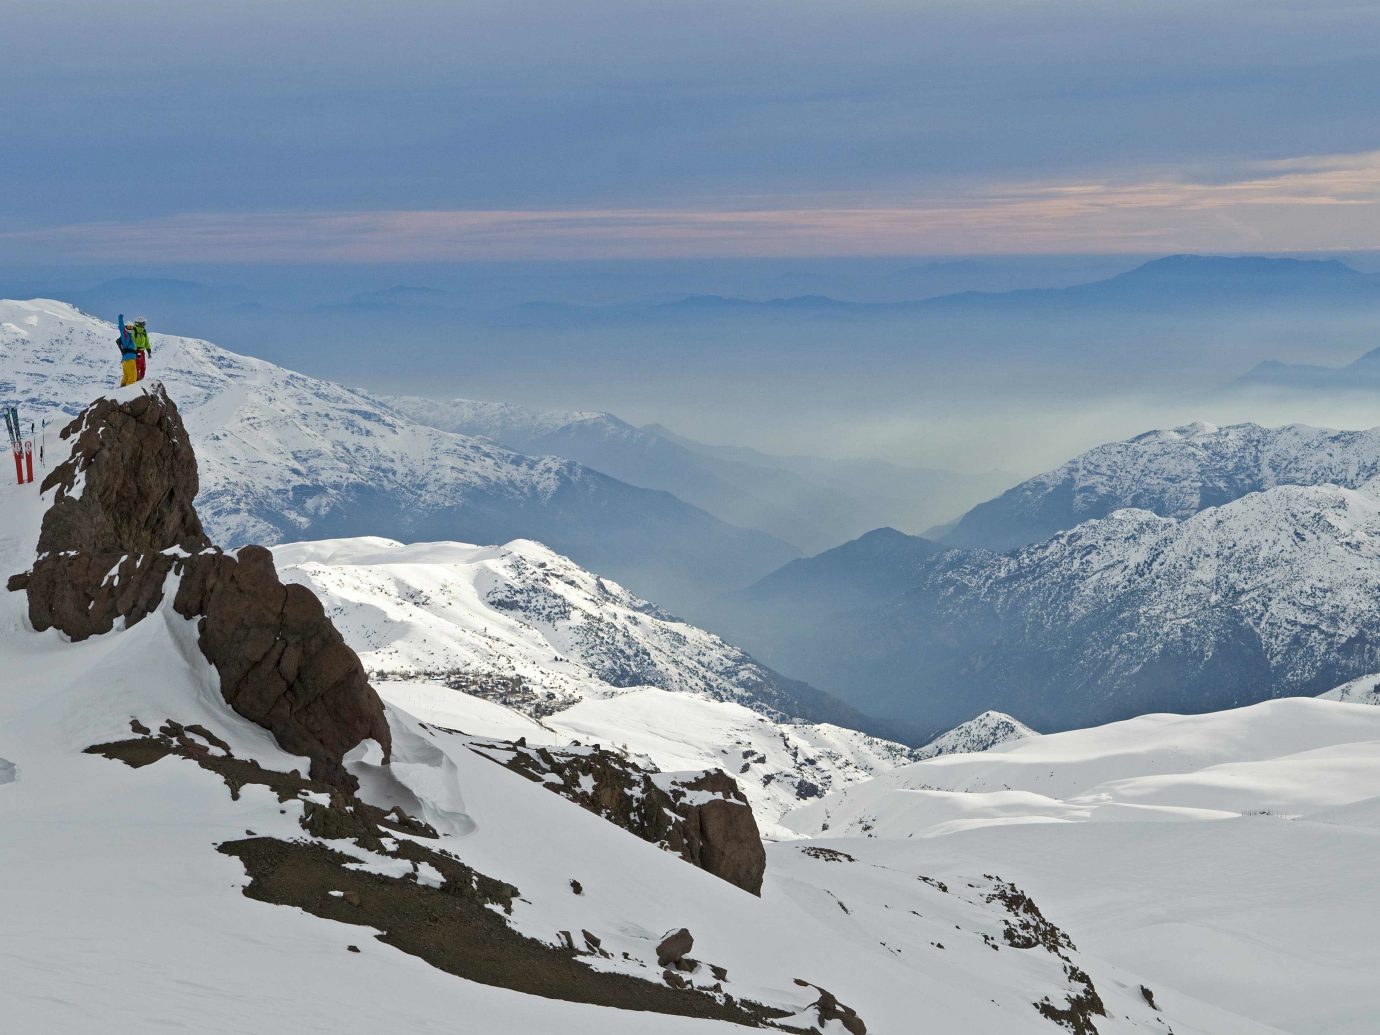 Where to go in July, Valle Nevado, Chile